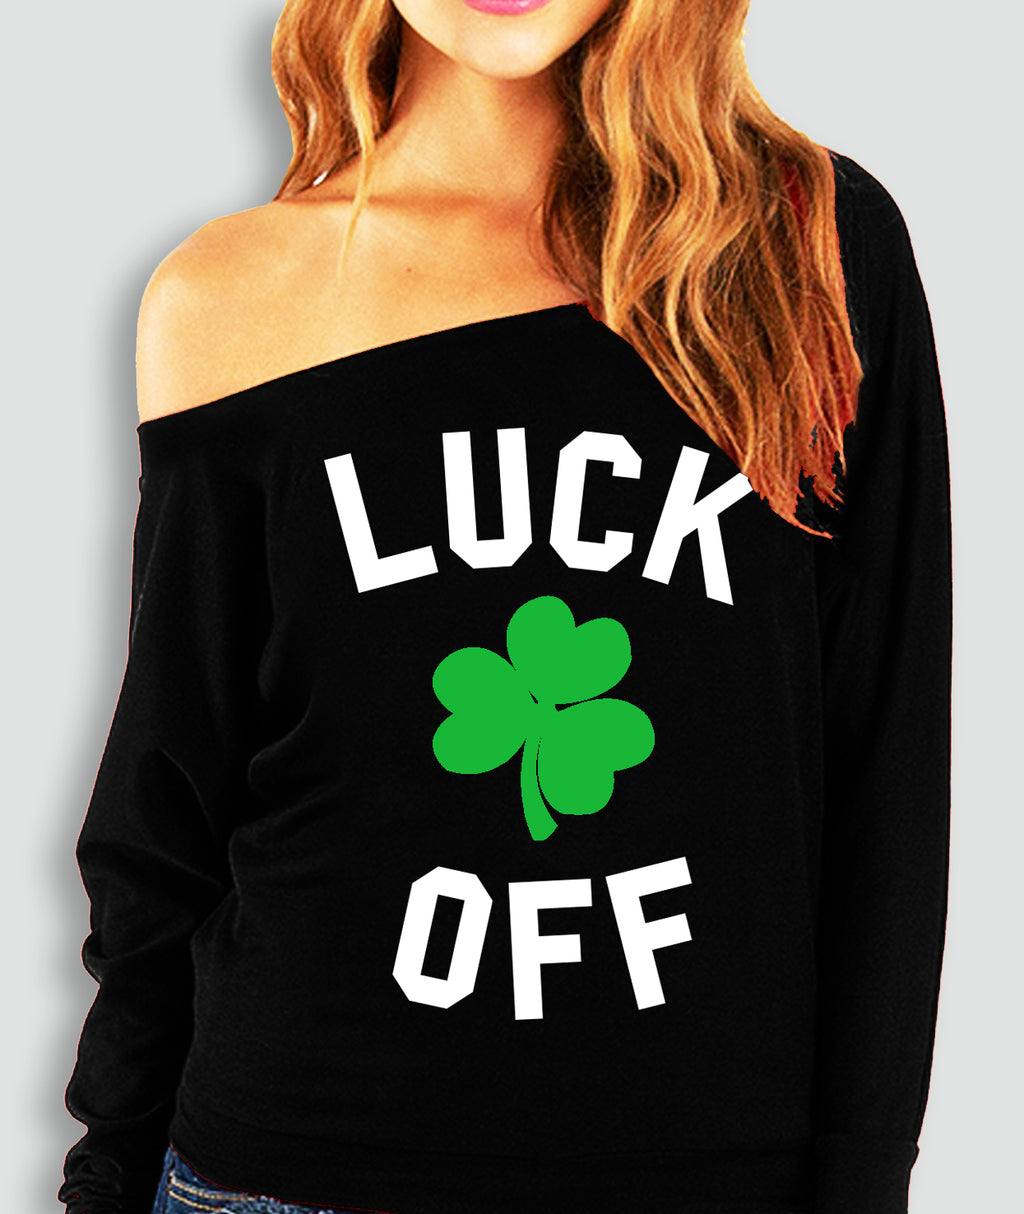 LUCK OFF Slouchy St. Patricks Day Shirt